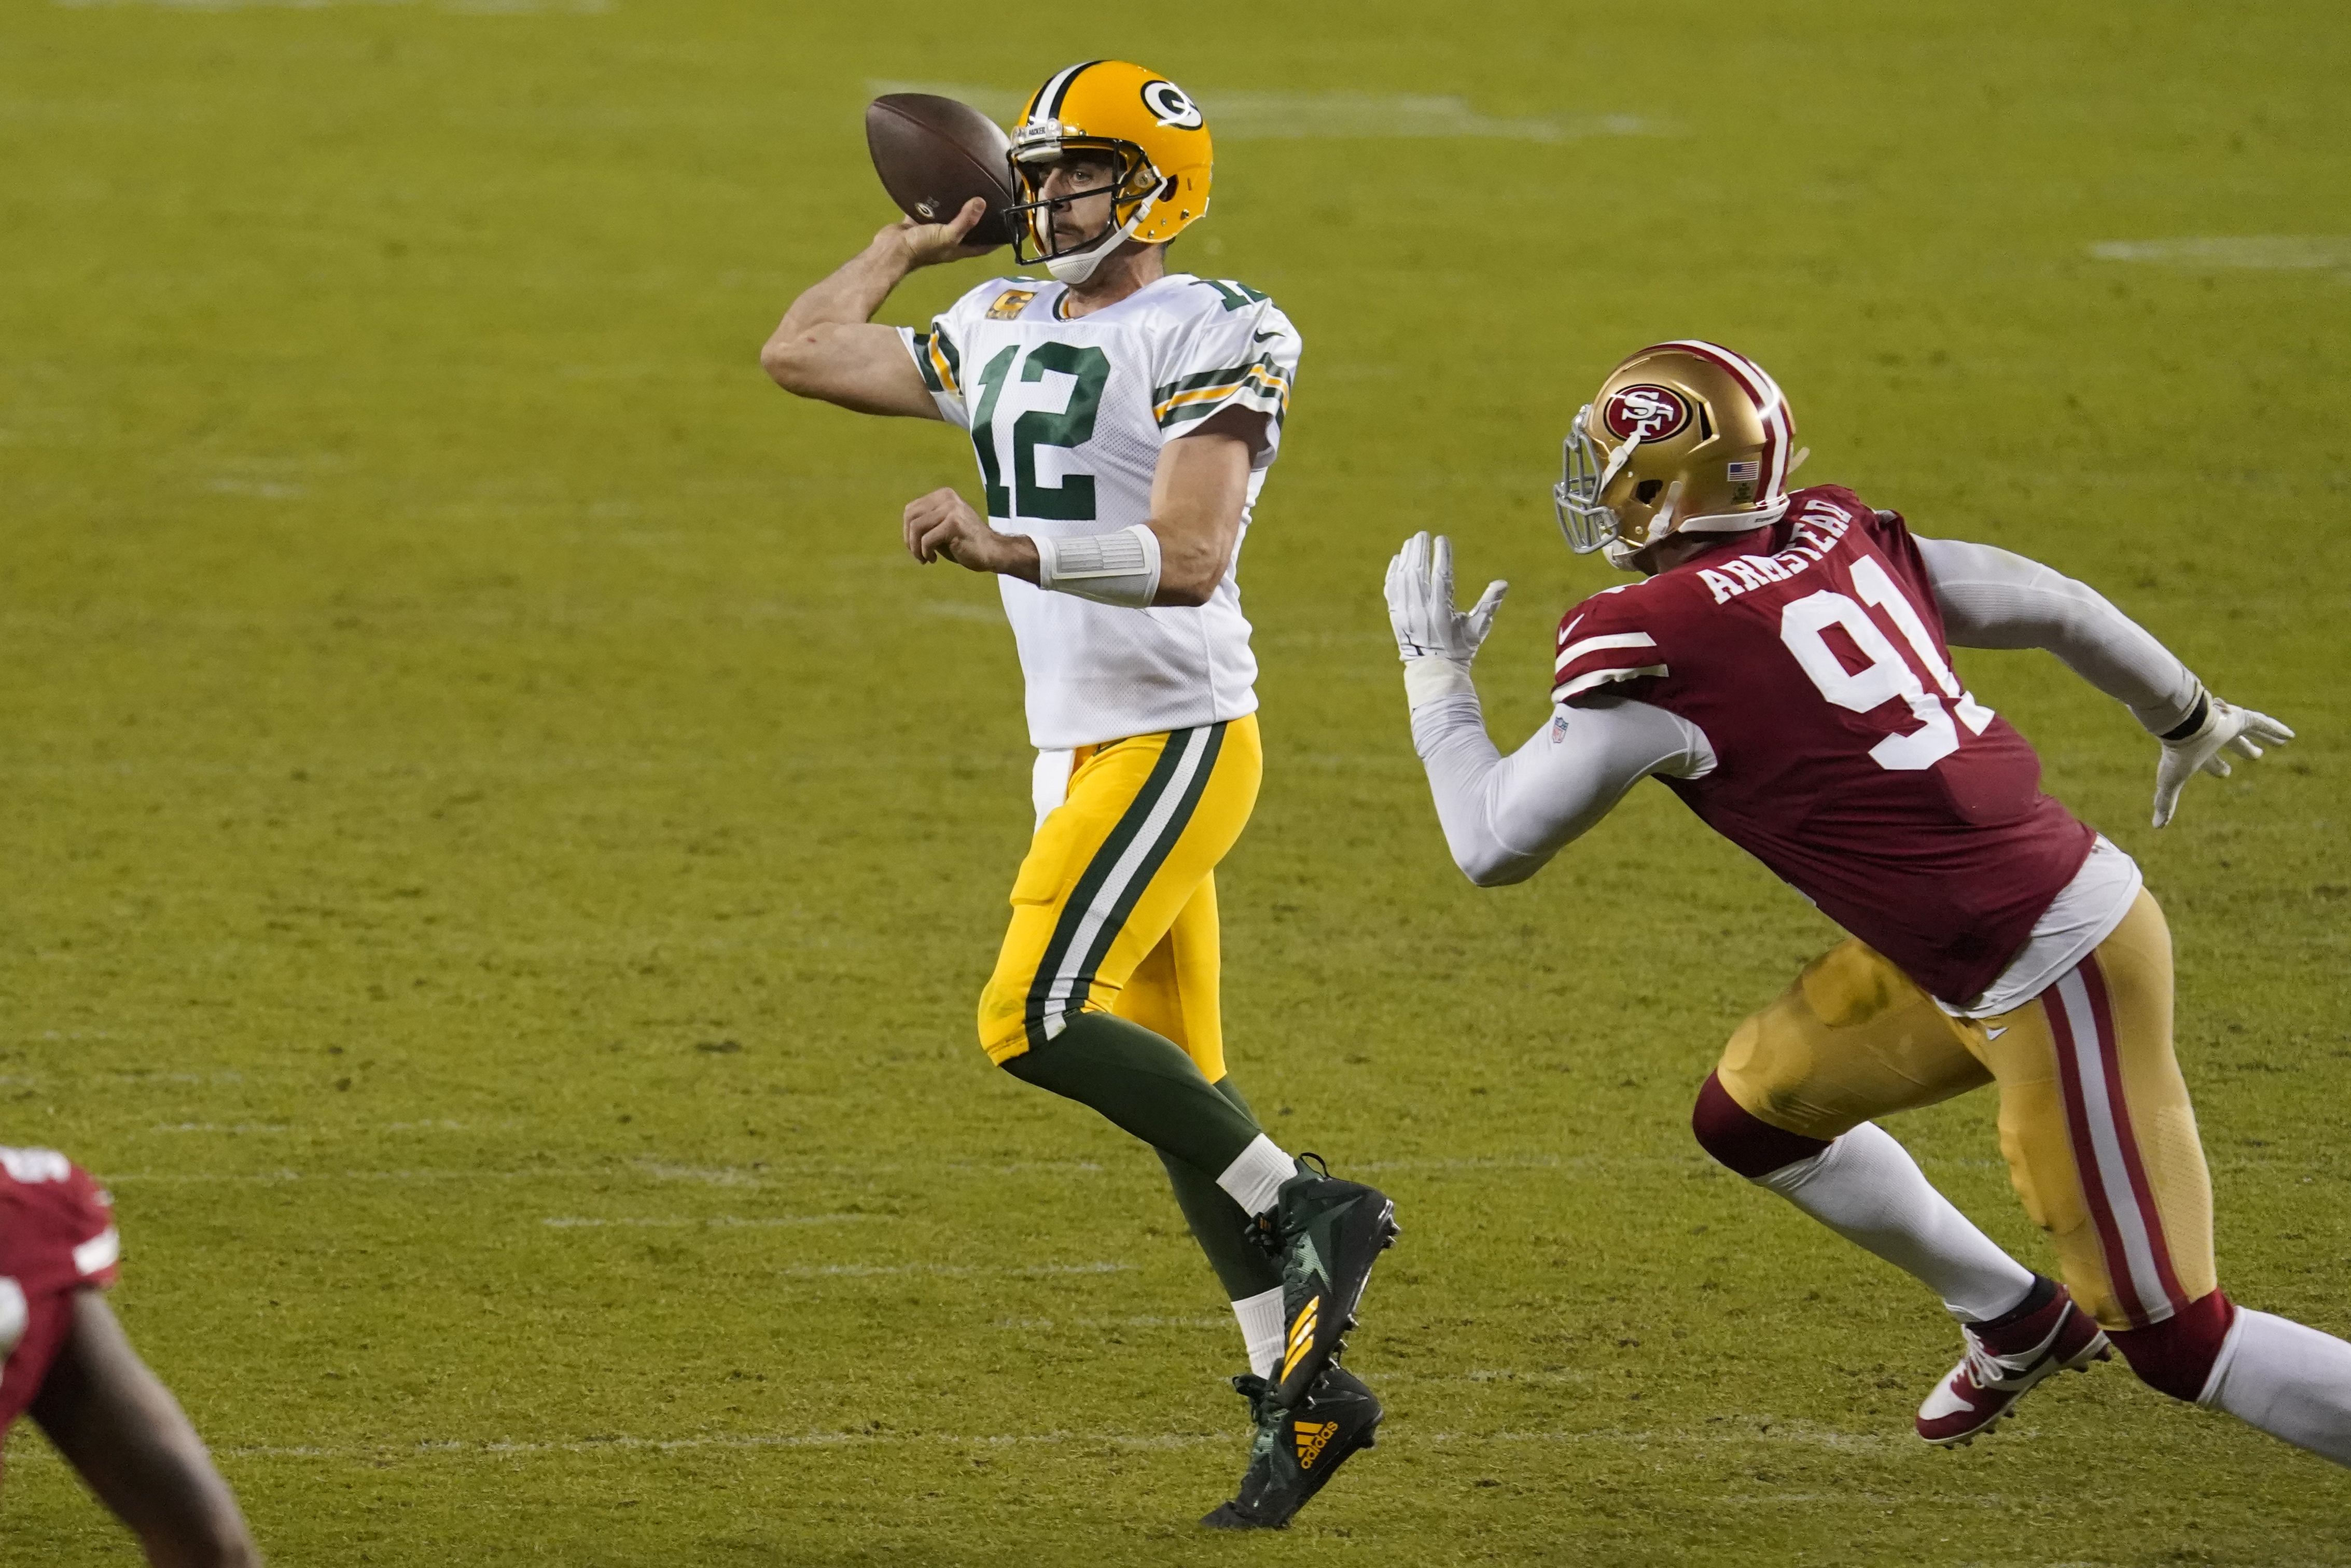 Packers defeat 49ers, 34-17